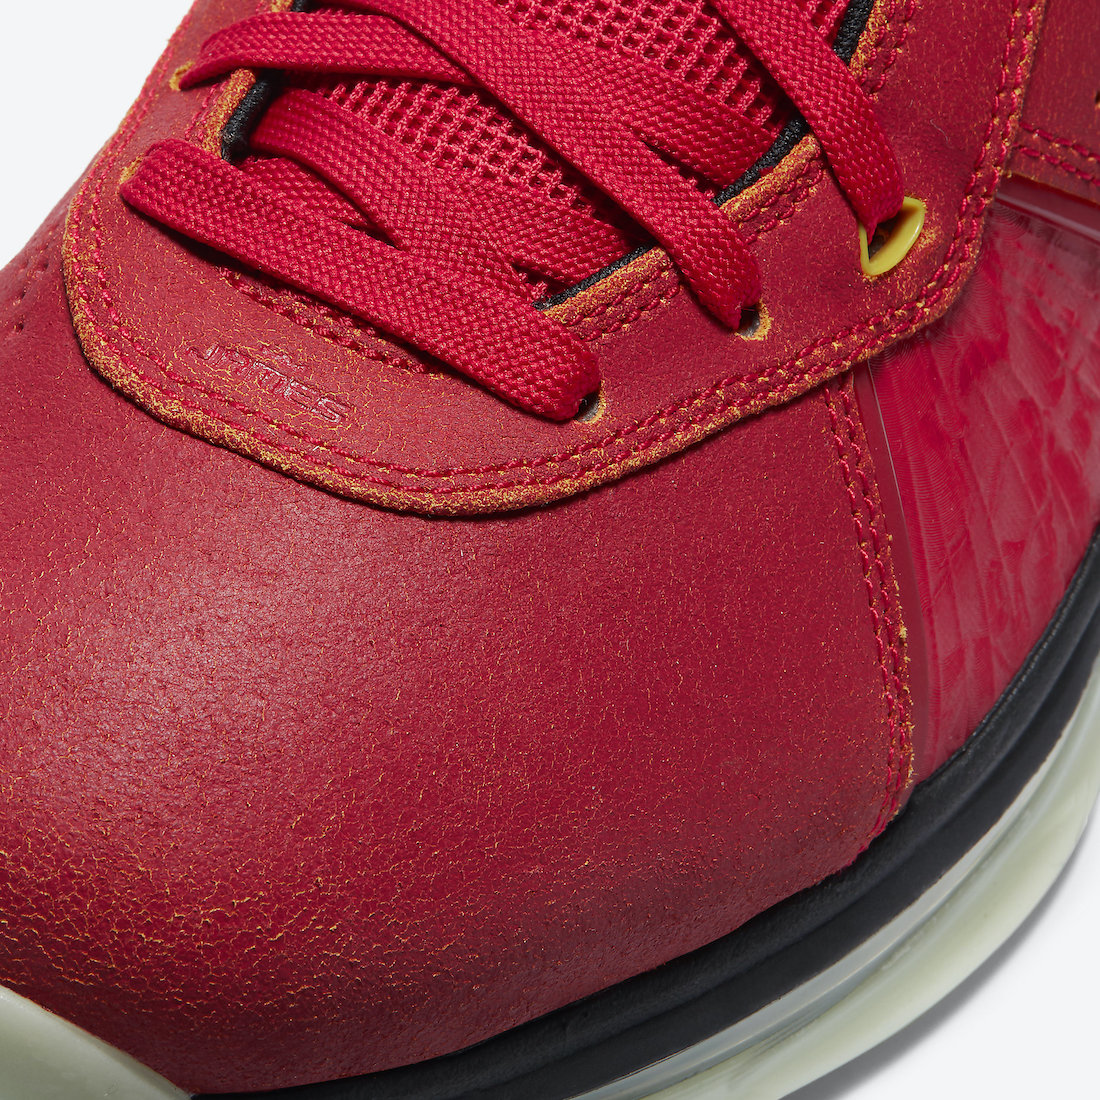 Nike LeBron 8 Gym Red CT5330-600 Release Info